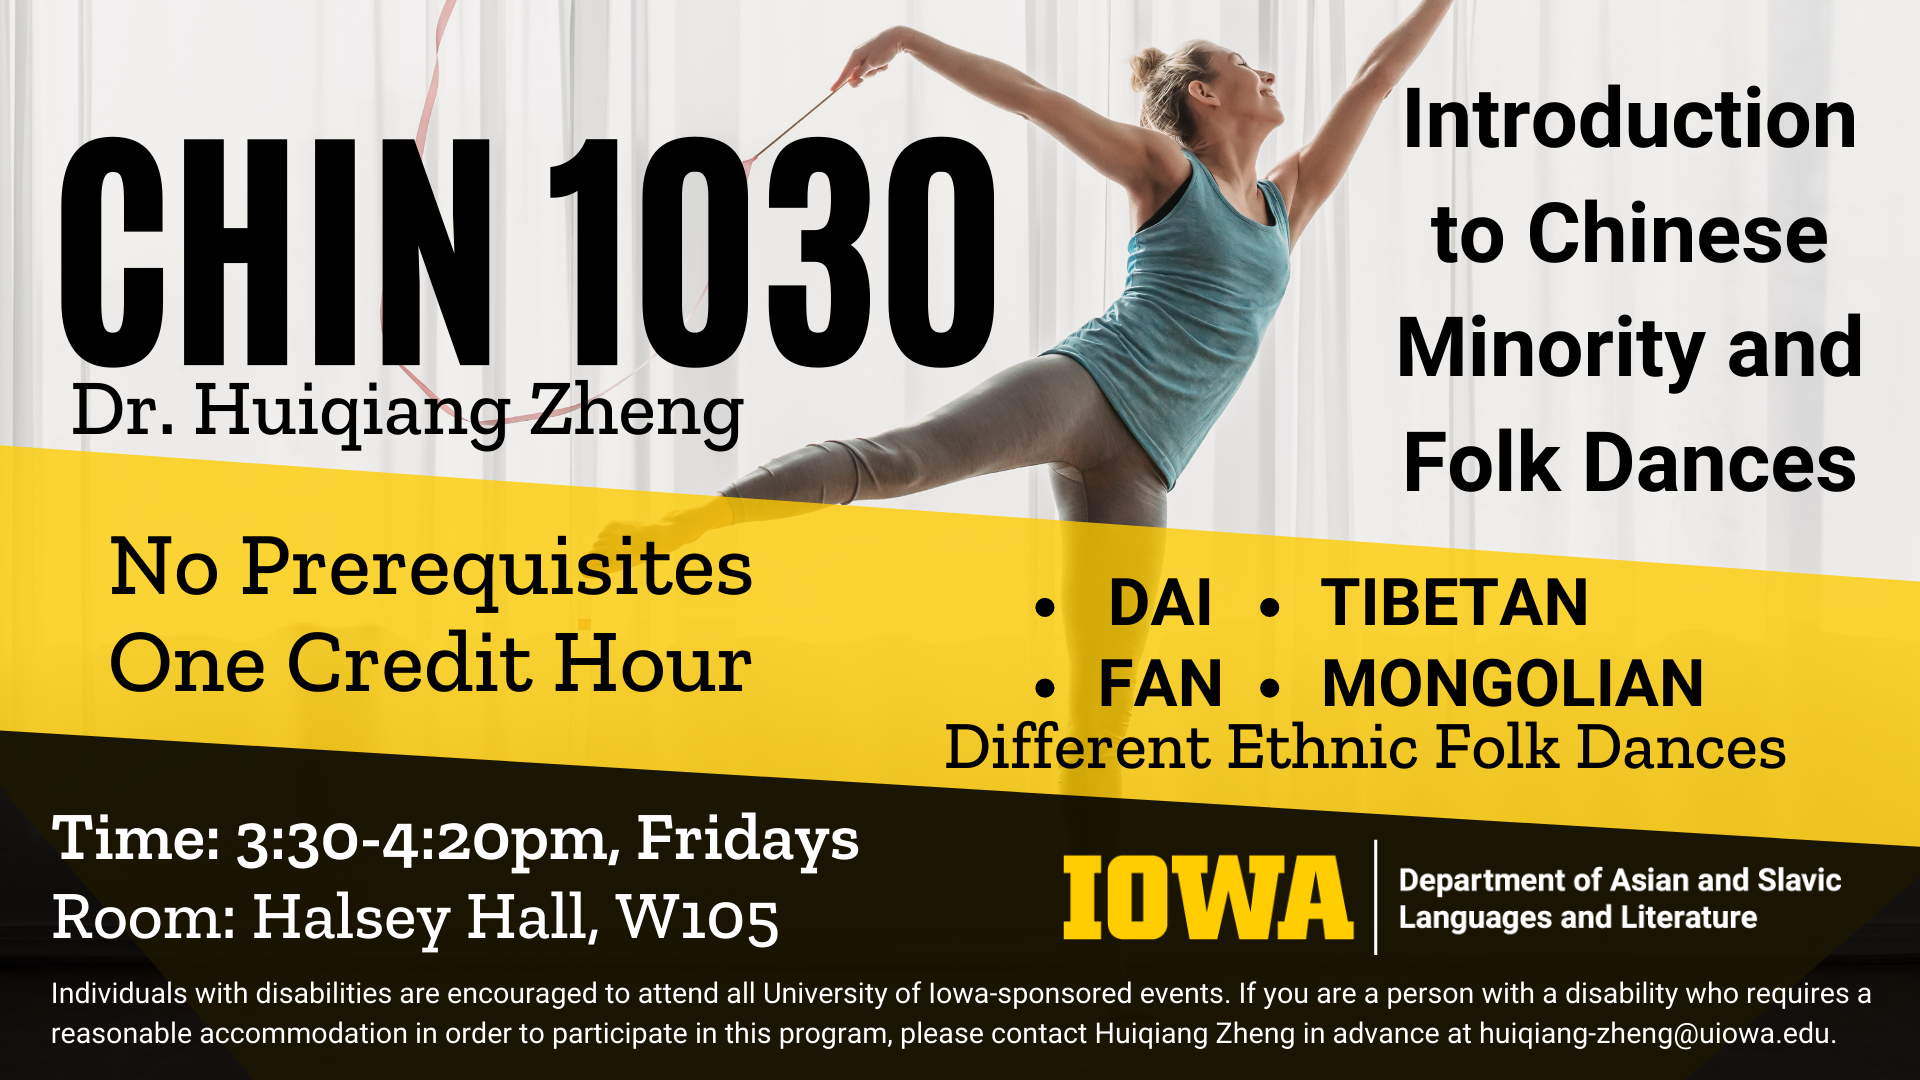 CHIN 1030 with Dr. Huiqiang Zheng. Introduction to Chinese Minority and Folk Dances. No prerequisites, one credit hour course. Meets on Fridays from 3 30 to 4 20 pm in Halsey Hall room W105. Dai, Fan, Tibetan, Mongolian, and different ethnic folk dances. Individuals with disabilities are encouraged to attend all University of Iowa-sponsored events. If you are a person with a disability who requires a reasonable accommodation in order to participate in this program, please contact Huiqiang Zheng in advance at huiqiang-zheng@uiowa.edu.